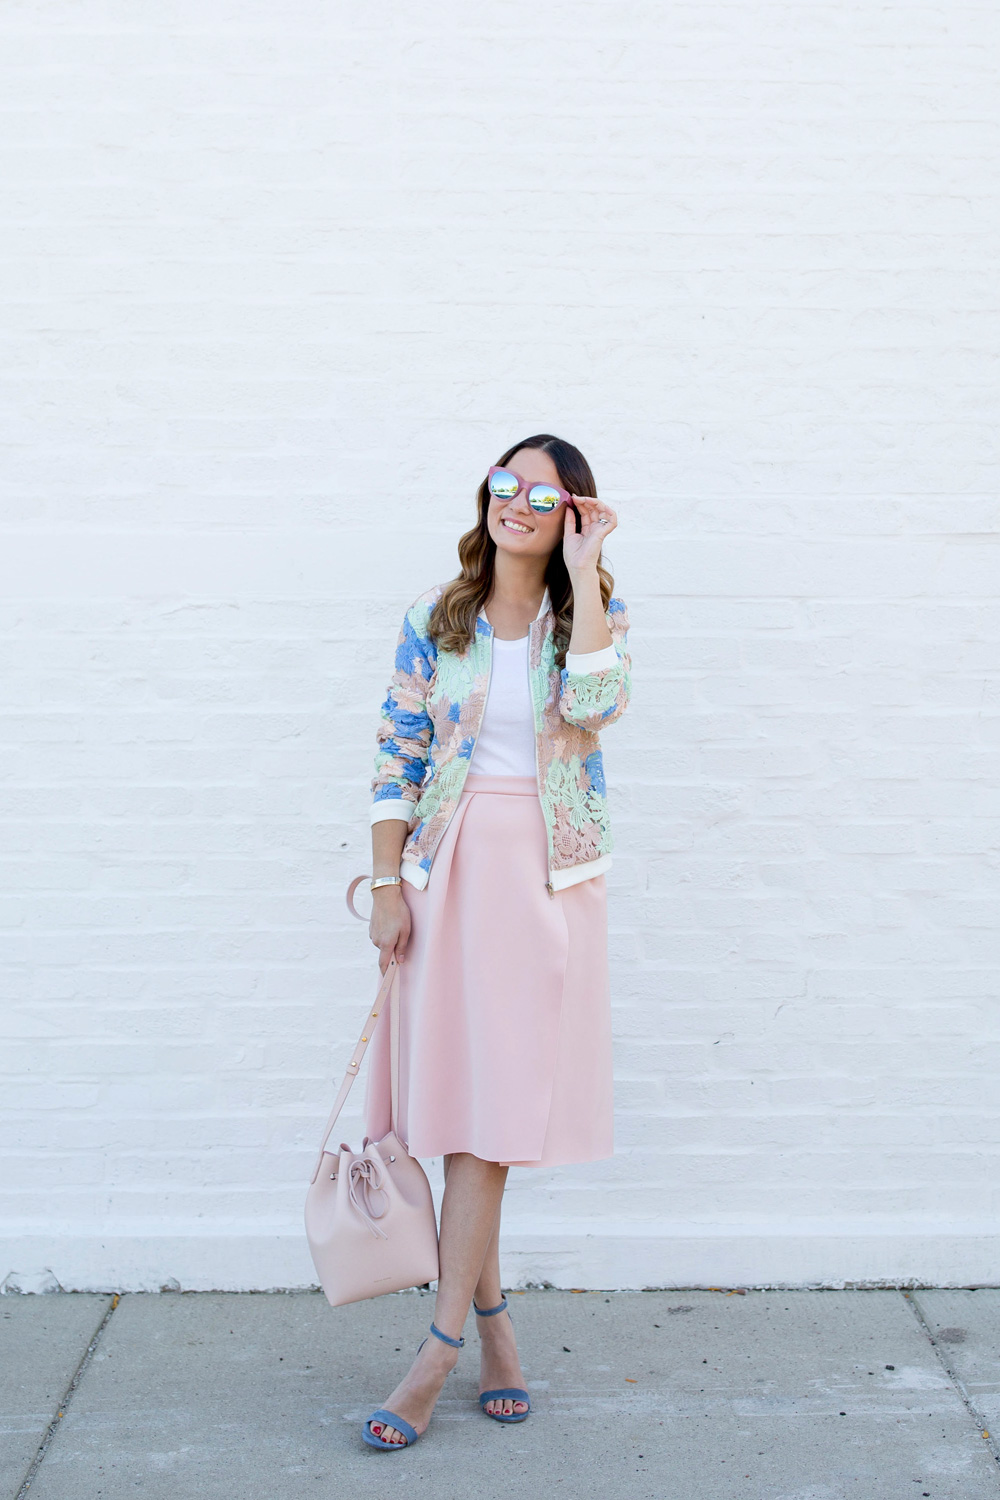 Jennifer Lake Style Charade in a pastel lace bomber jacket, pink skirt, pink Mansur Gavriel Bucket bag, and Packed Party Toms sunglasses